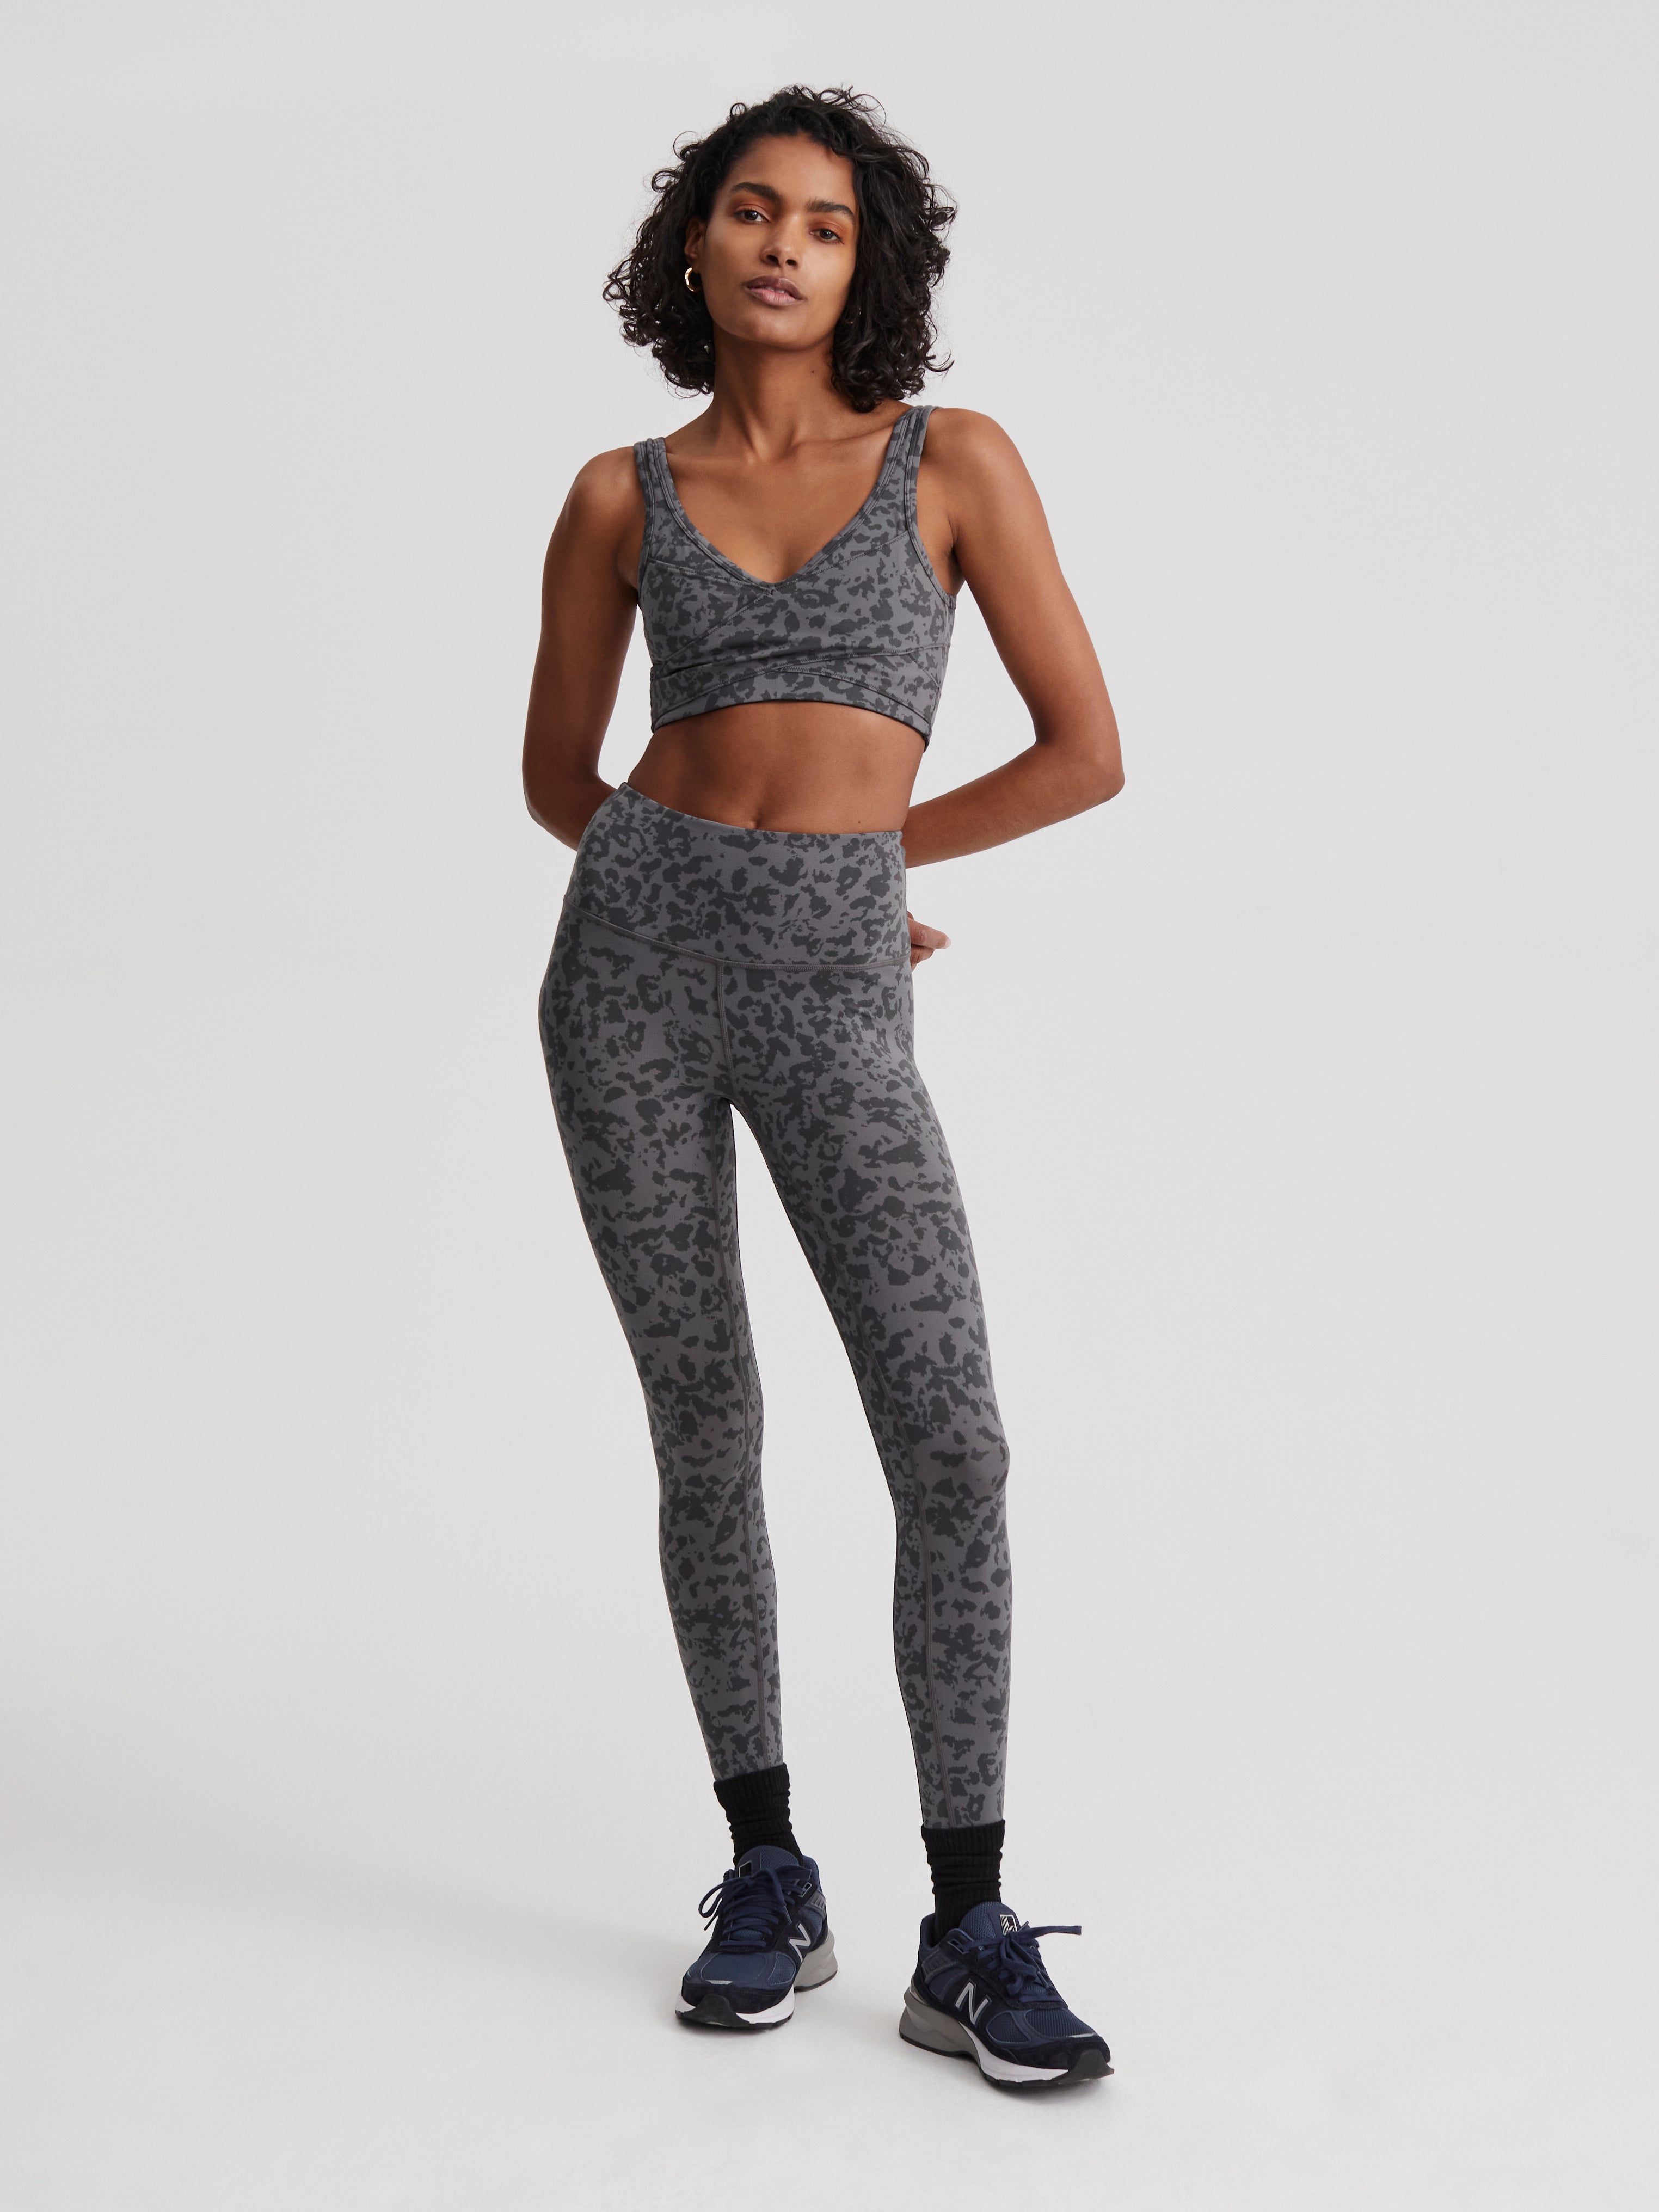 Varley Let's Move Leggings - Midnight Distorted Cheetah – Curated